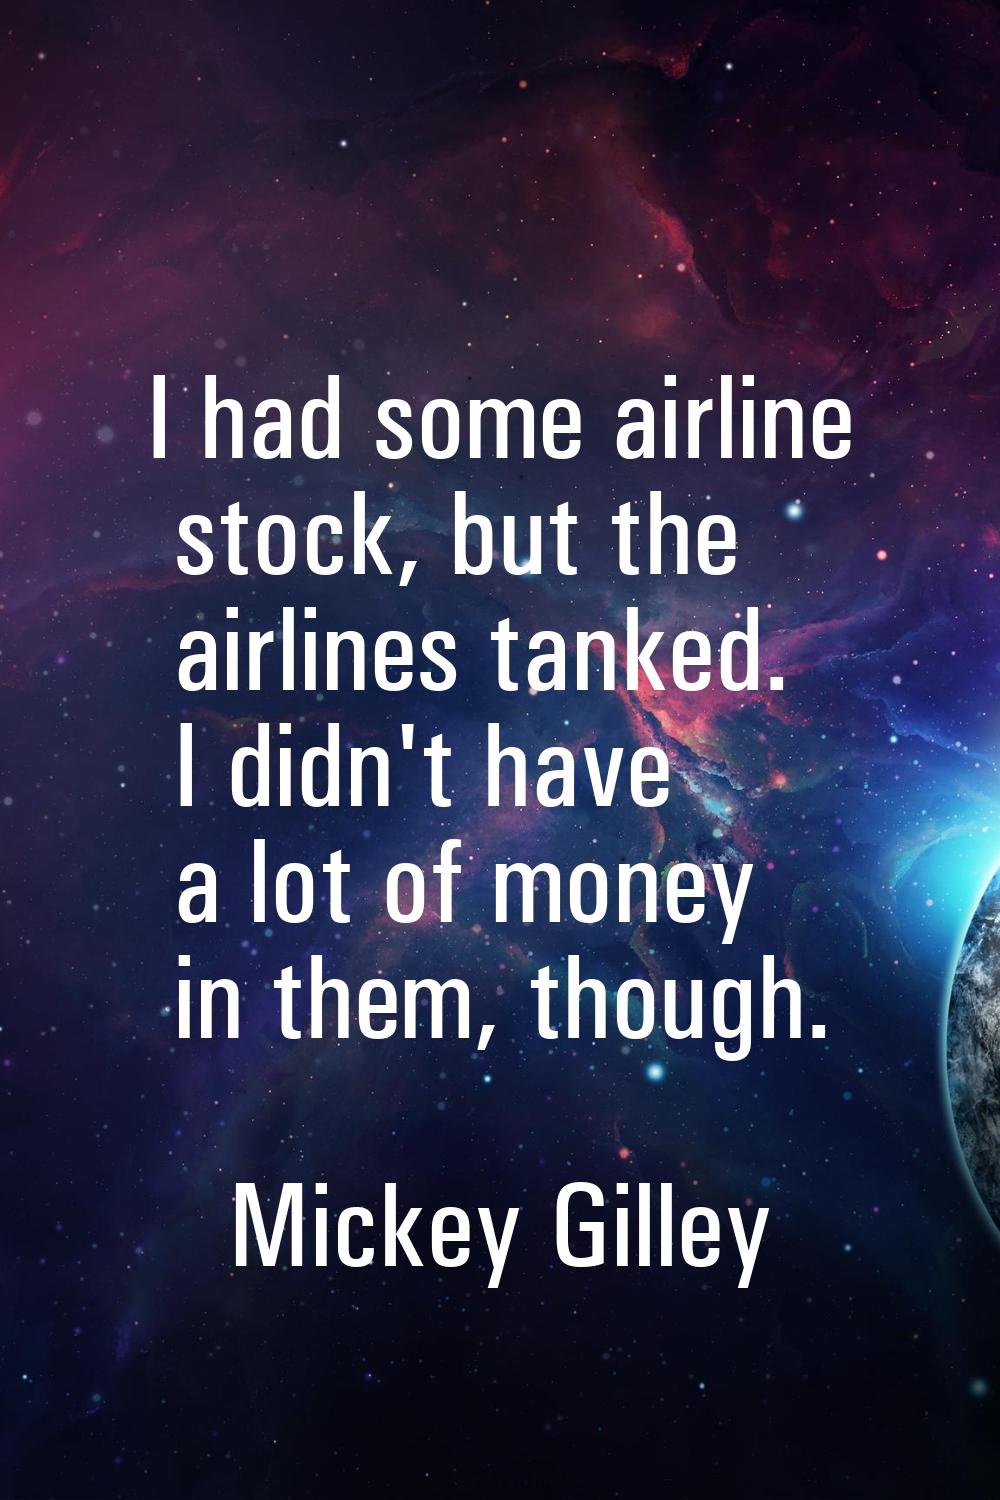 I had some airline stock, but the airlines tanked. I didn't have a lot of money in them, though.